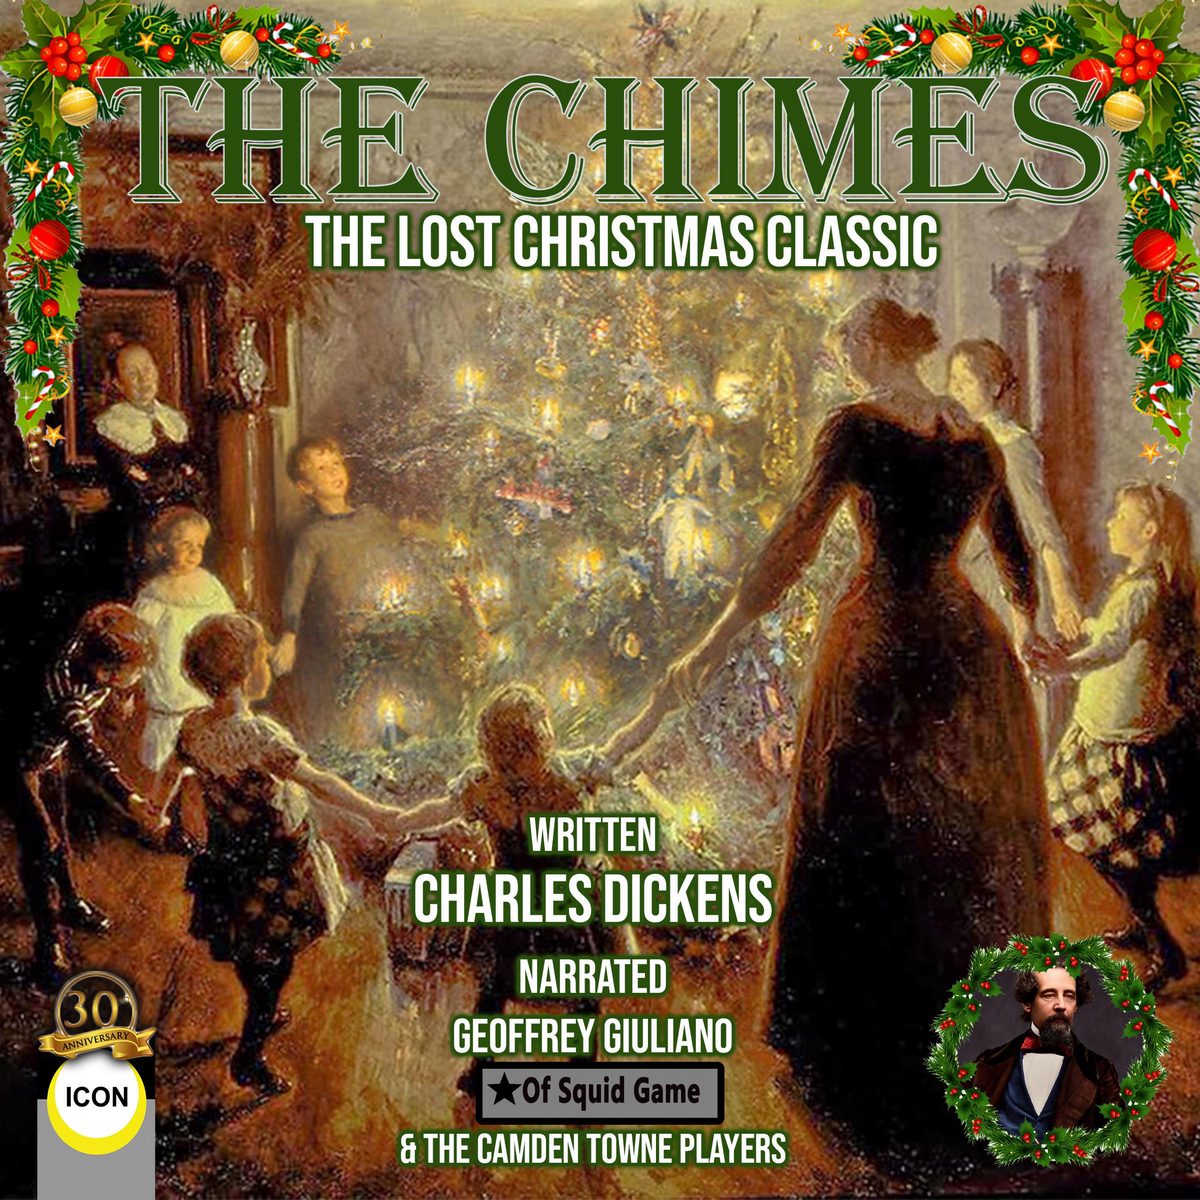 The Chimes The Lost Christmas Classic